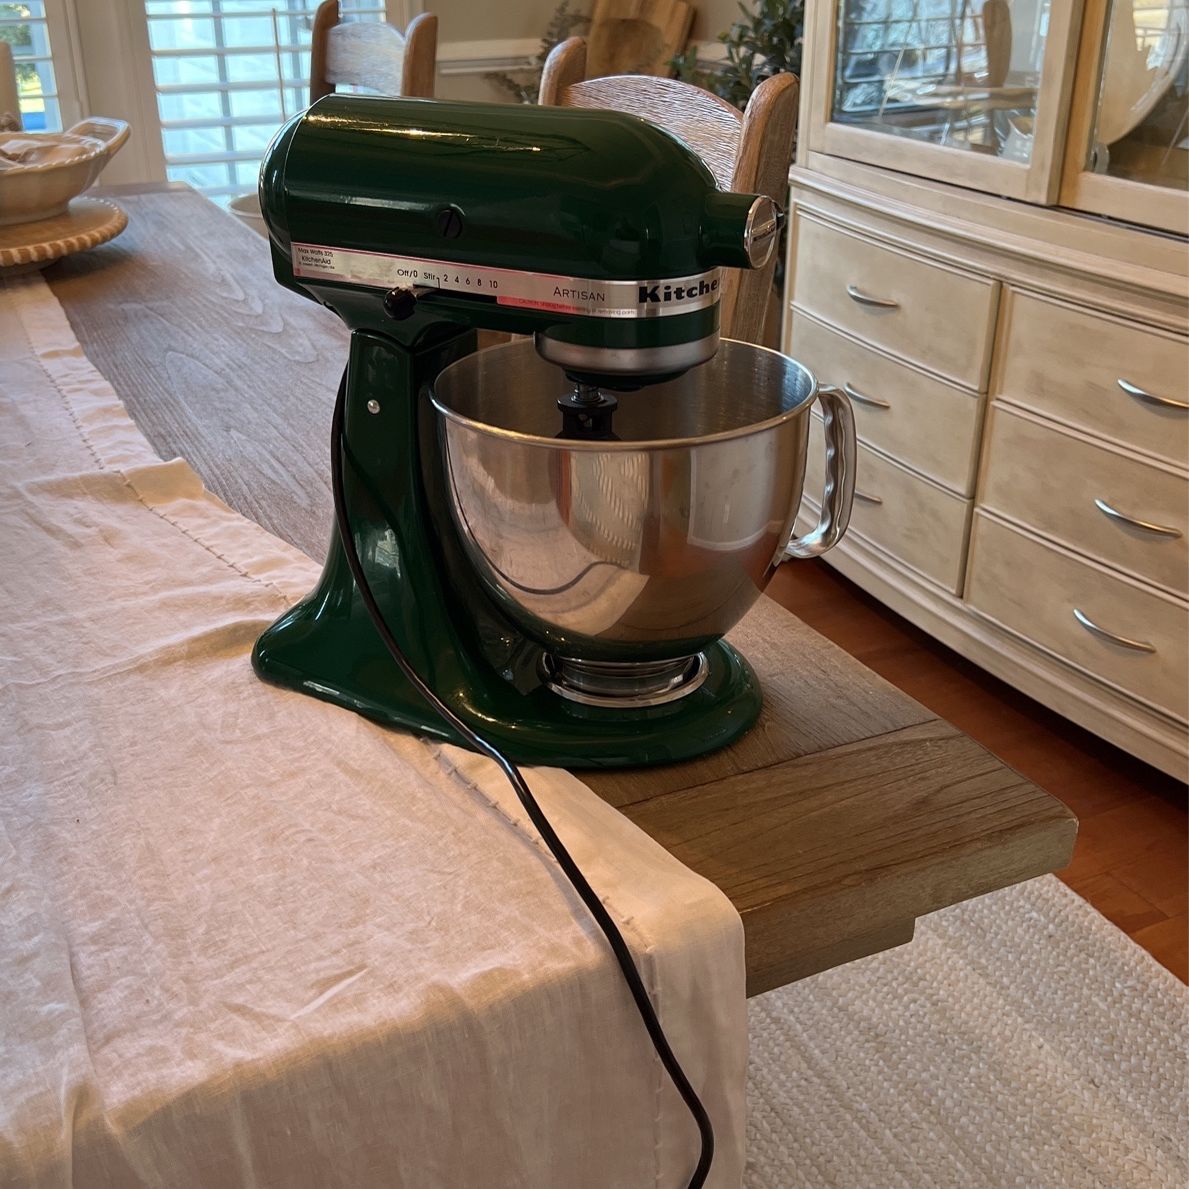 Kitchen Aid artisan green mixer Max Watts 325 for Sale in Virginia